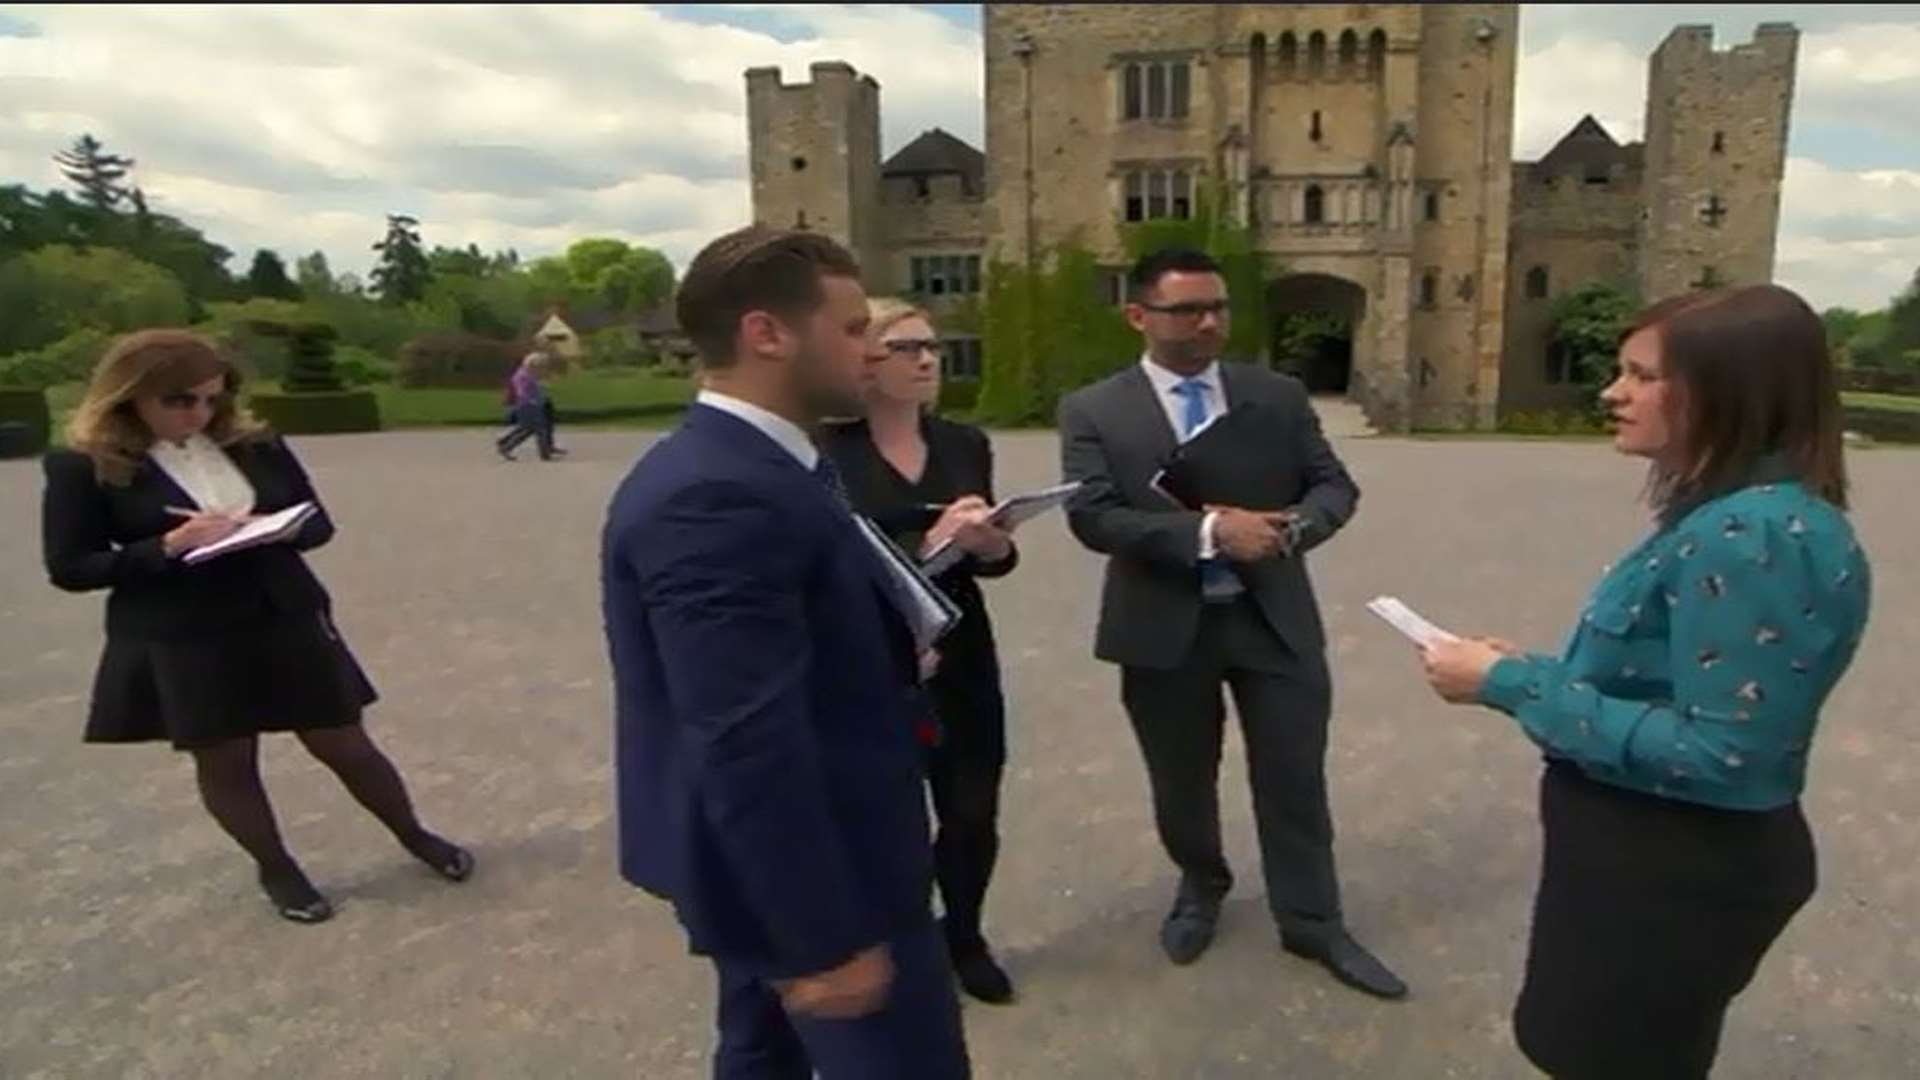 Hever Castle spokesman Sarah Cole negotiates with The Apprentice candidates, watched by Karren Brady. Picture: Hever Castle